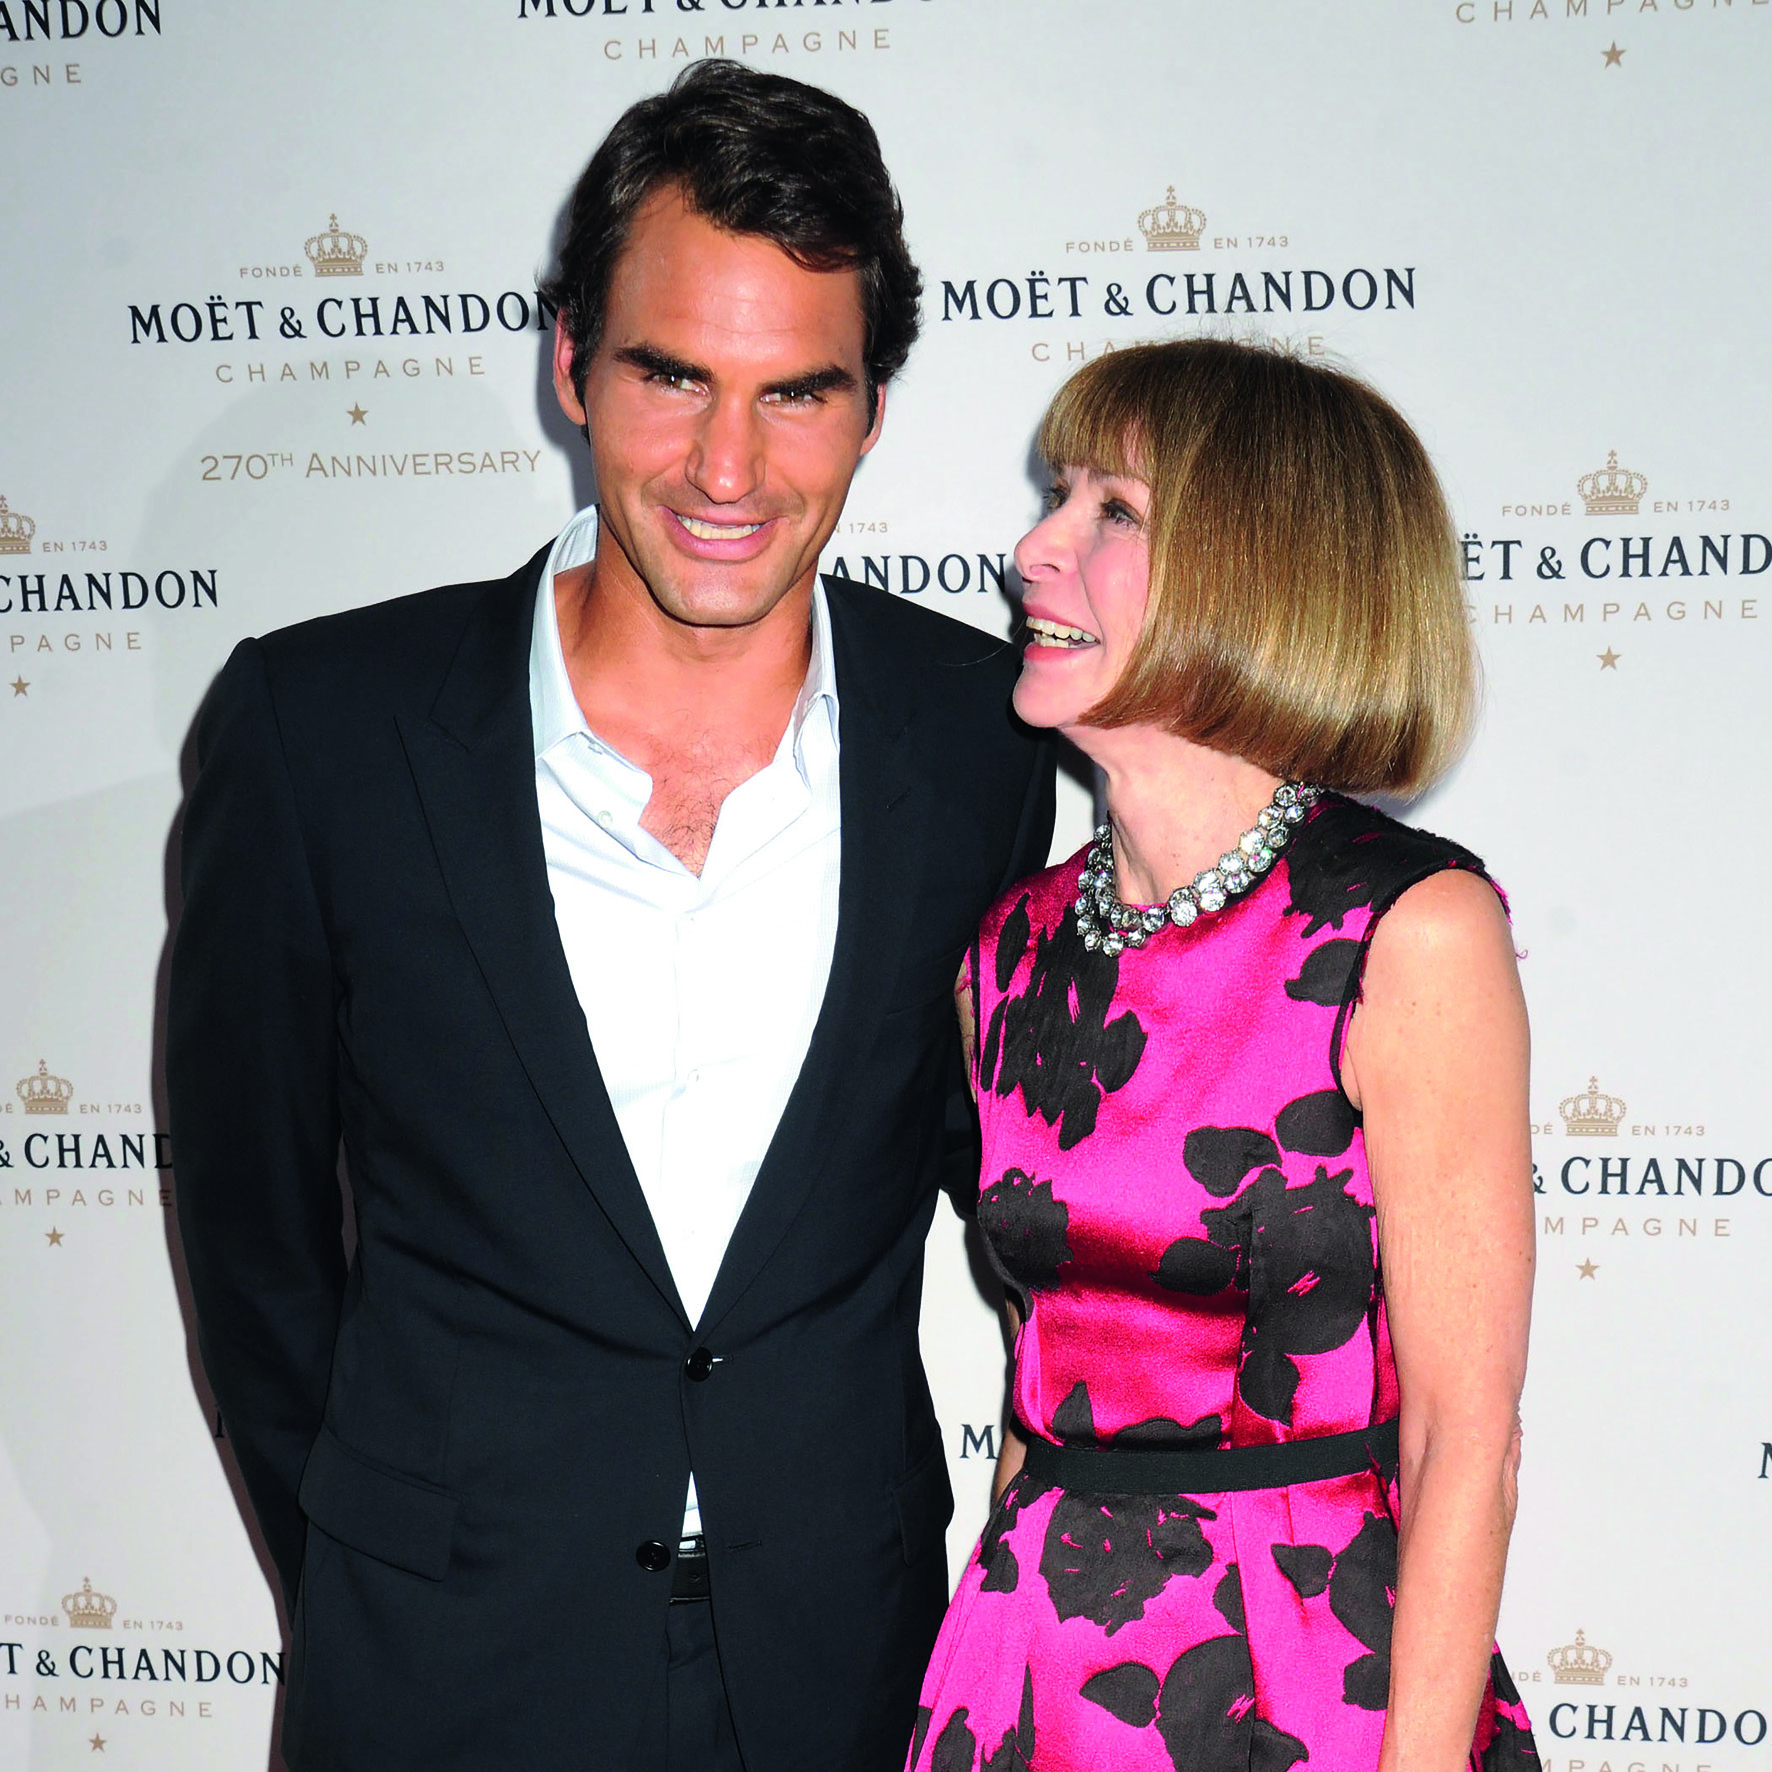   © The Stylish Life - Tennis, published by teNeues, www.teneues.com. Moet &amp; Chandon celebrate its 270th Anniversary with Roger Federer in NYC, Photo © Johns PKI/Splash News/Corbis.  